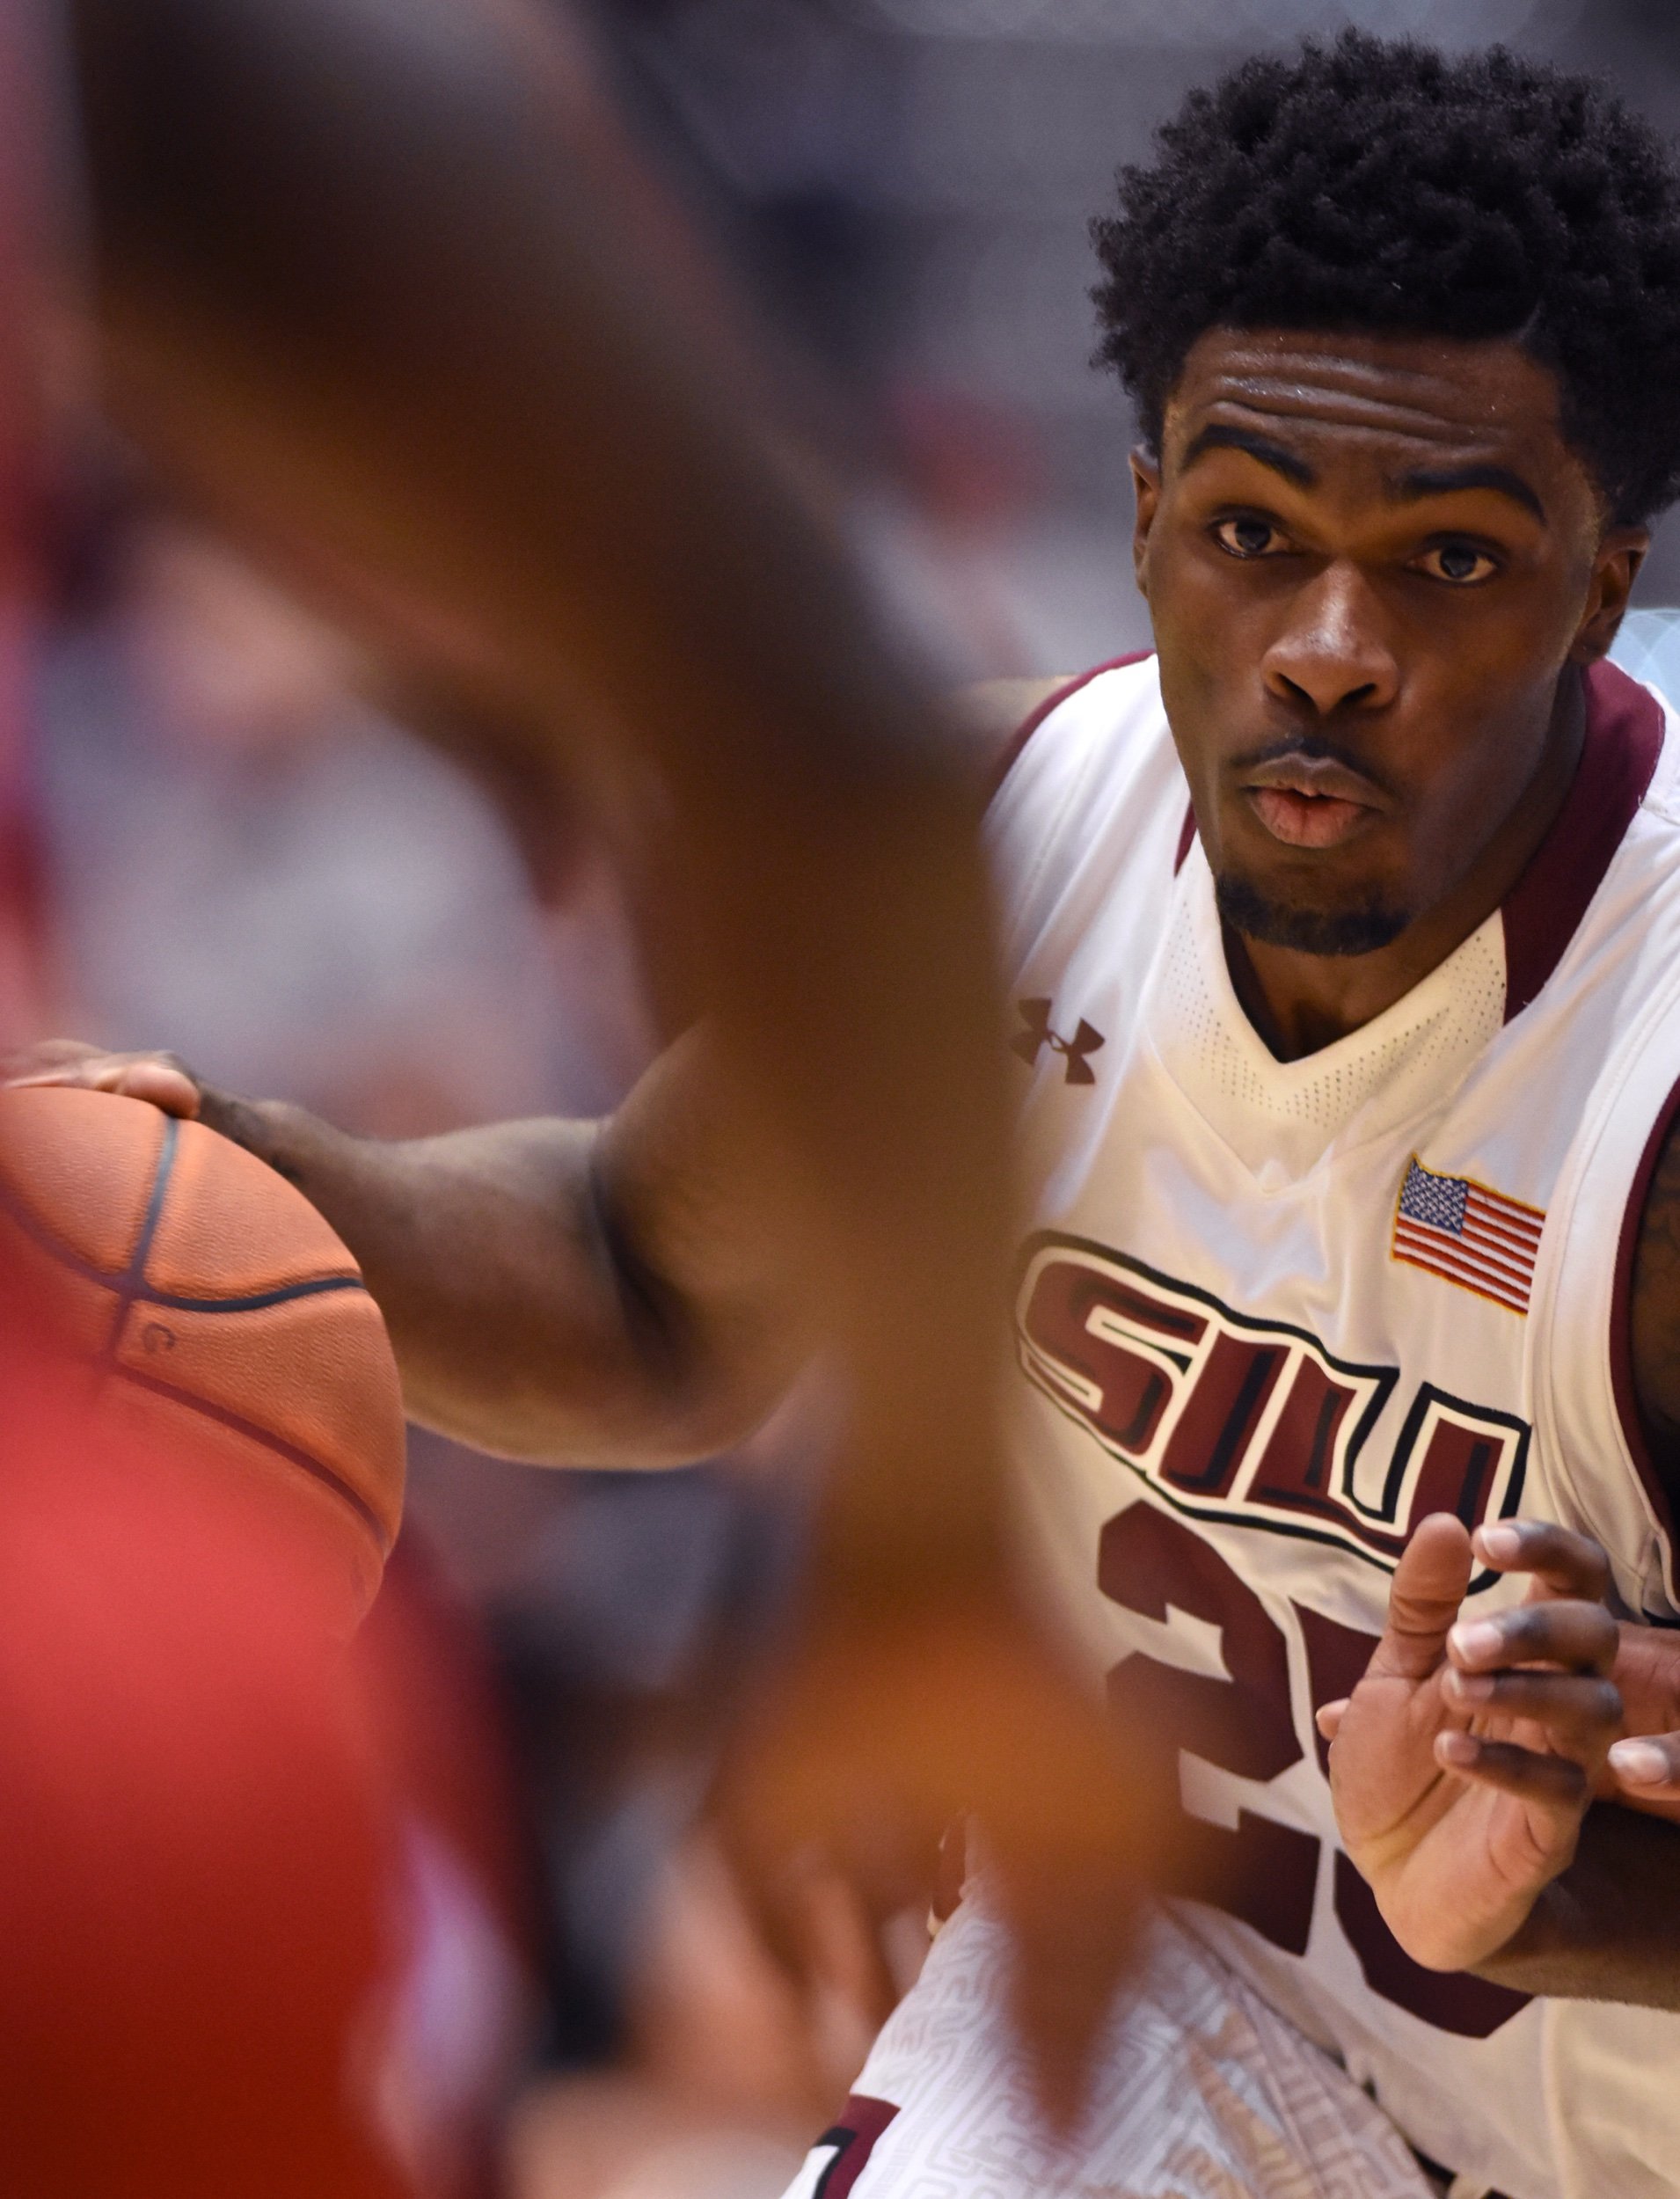  Southern Illinois University senior guard Anthony Beane looks toward an oncoming player as he barrels down the court during SIU’s 71-59 victory against Bradley on Feb. 17 at SIU Arena in Carbondale, Illinois. Beane, who reached 1,000 career points i